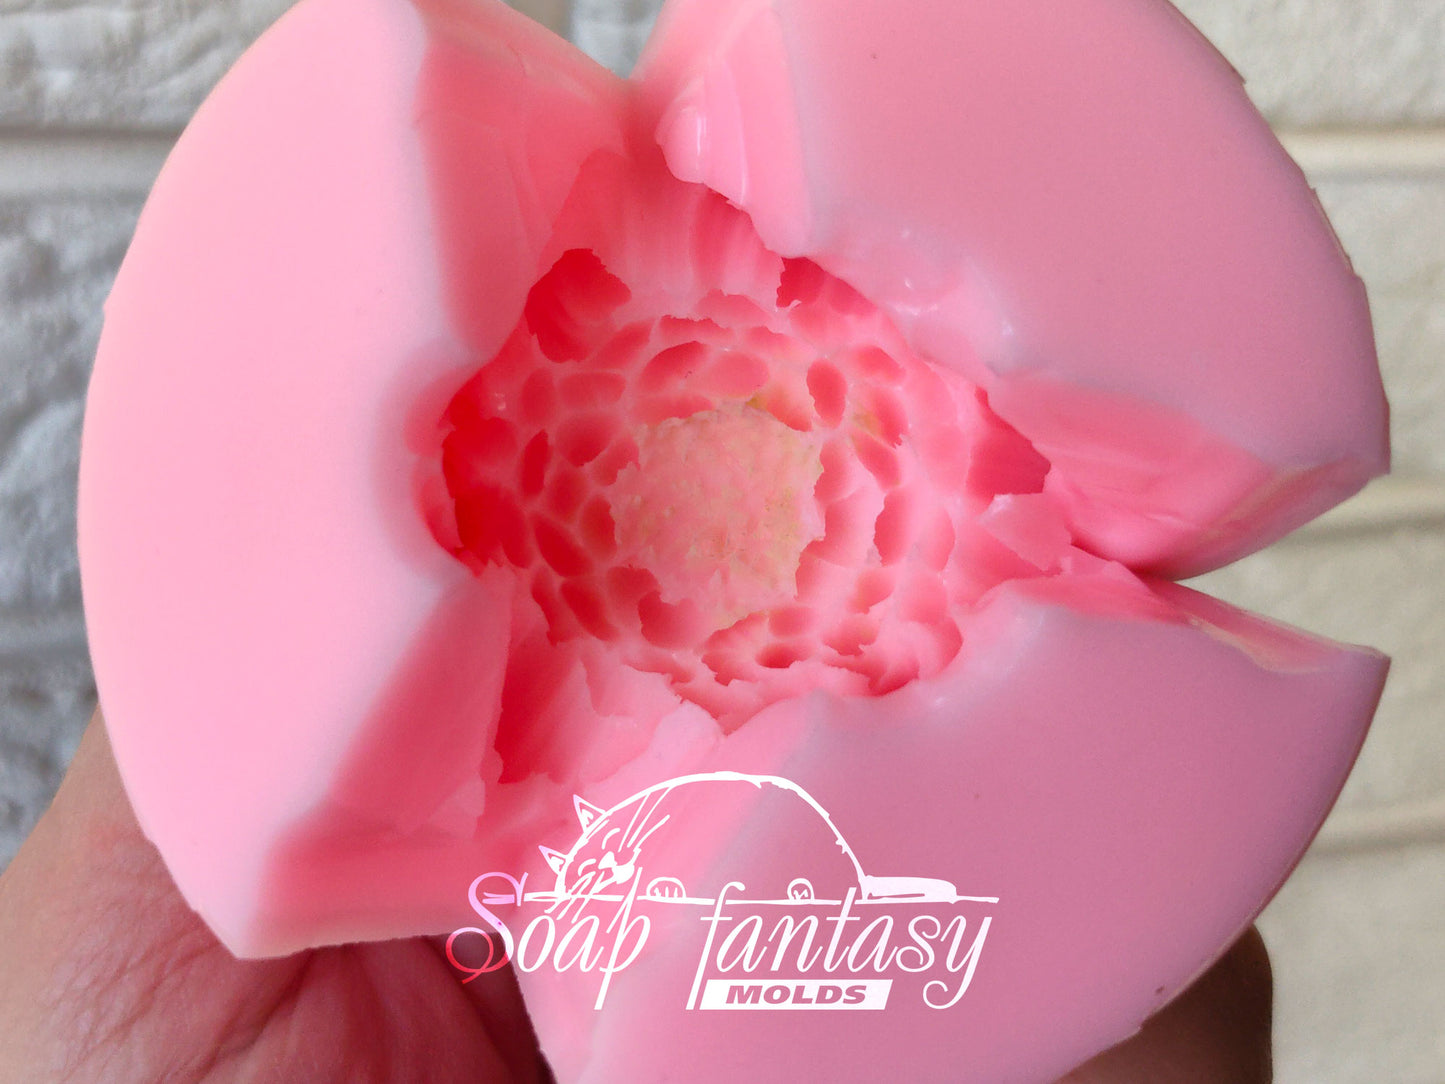 Mini chrysanthemum "Lucie" silicone mold for soap making